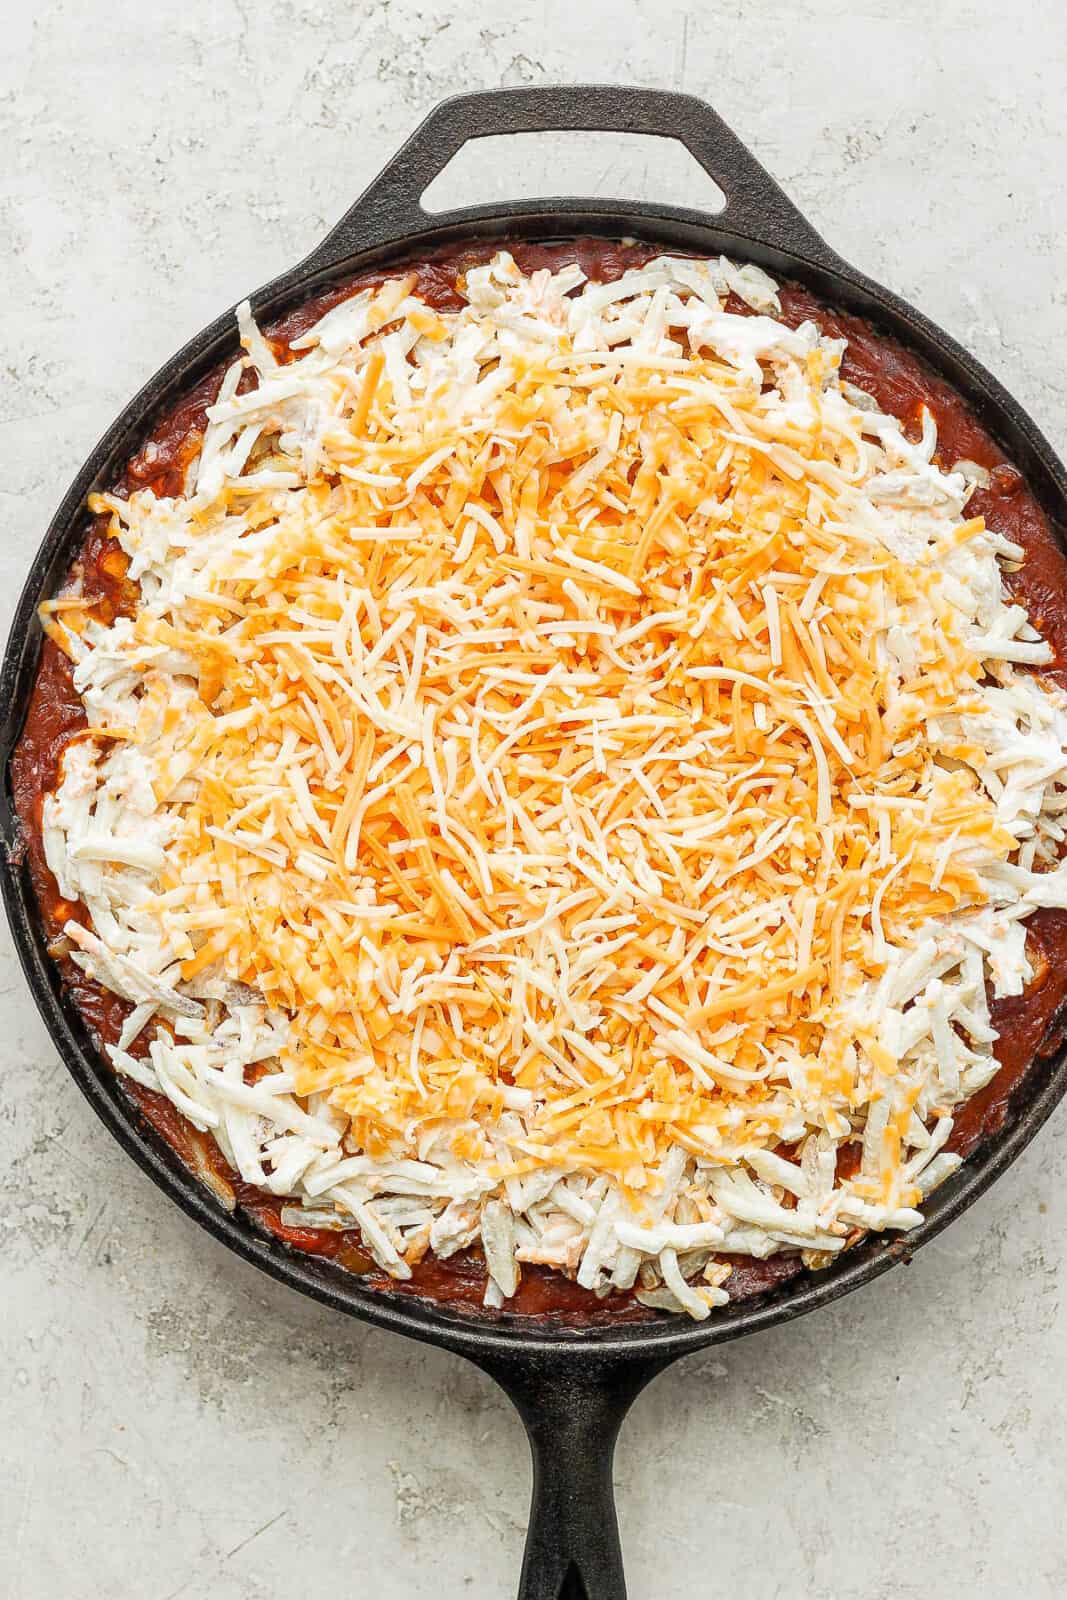 The filling with the cheese and hash brown mixture spread on top.